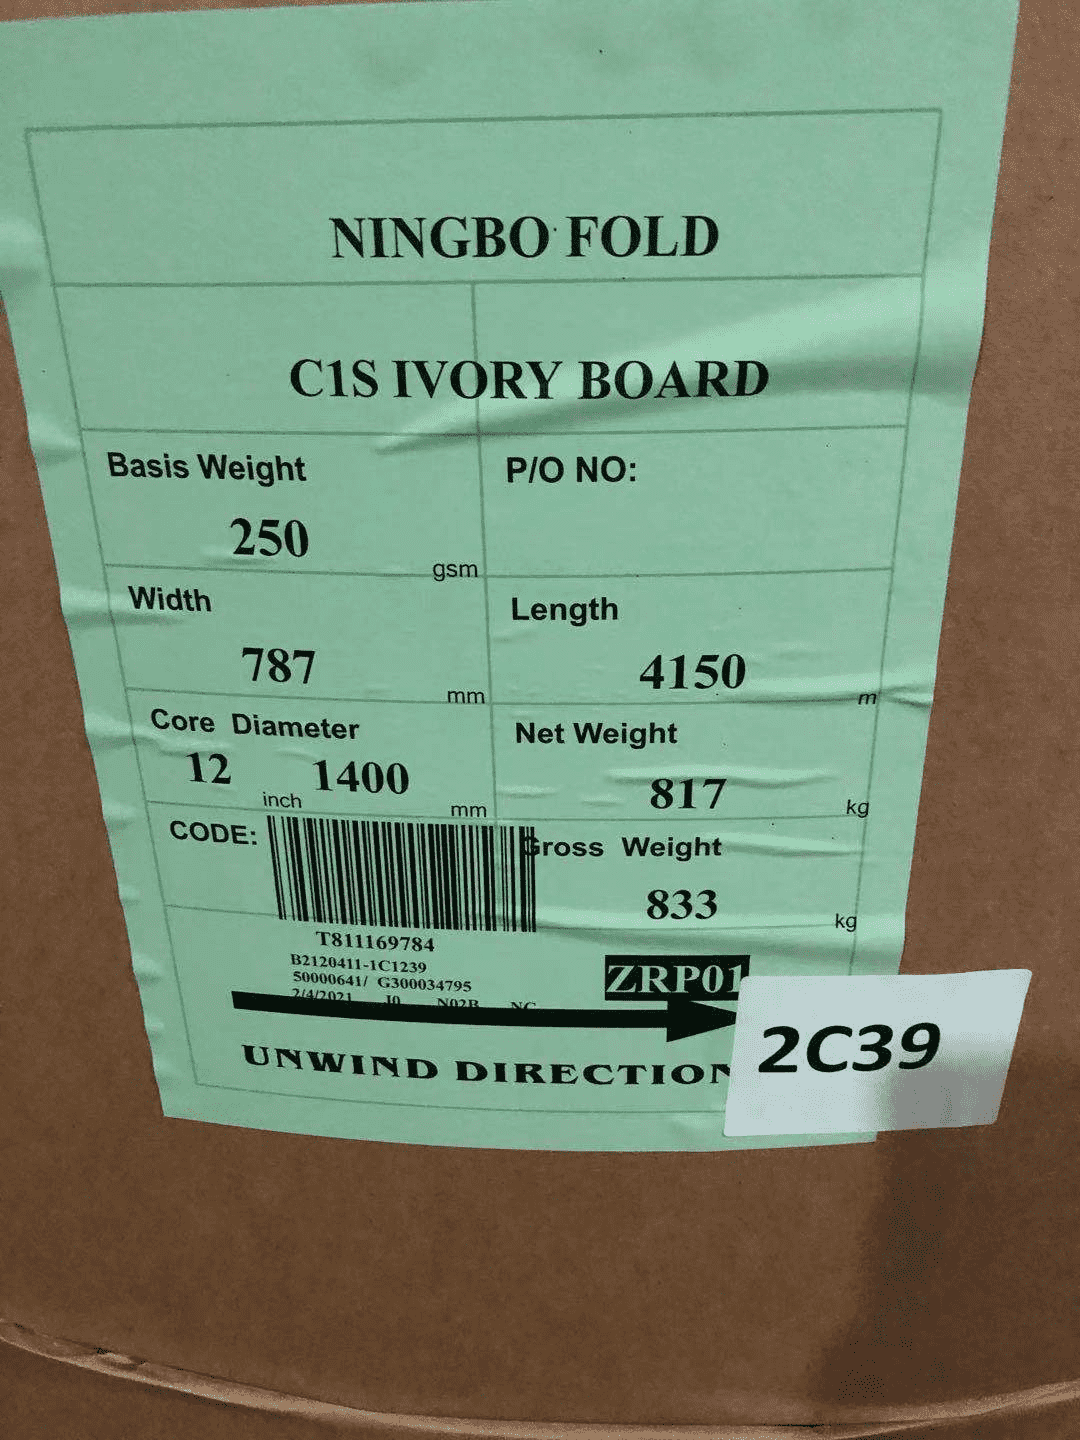  about ningbo fold, you may need to know something